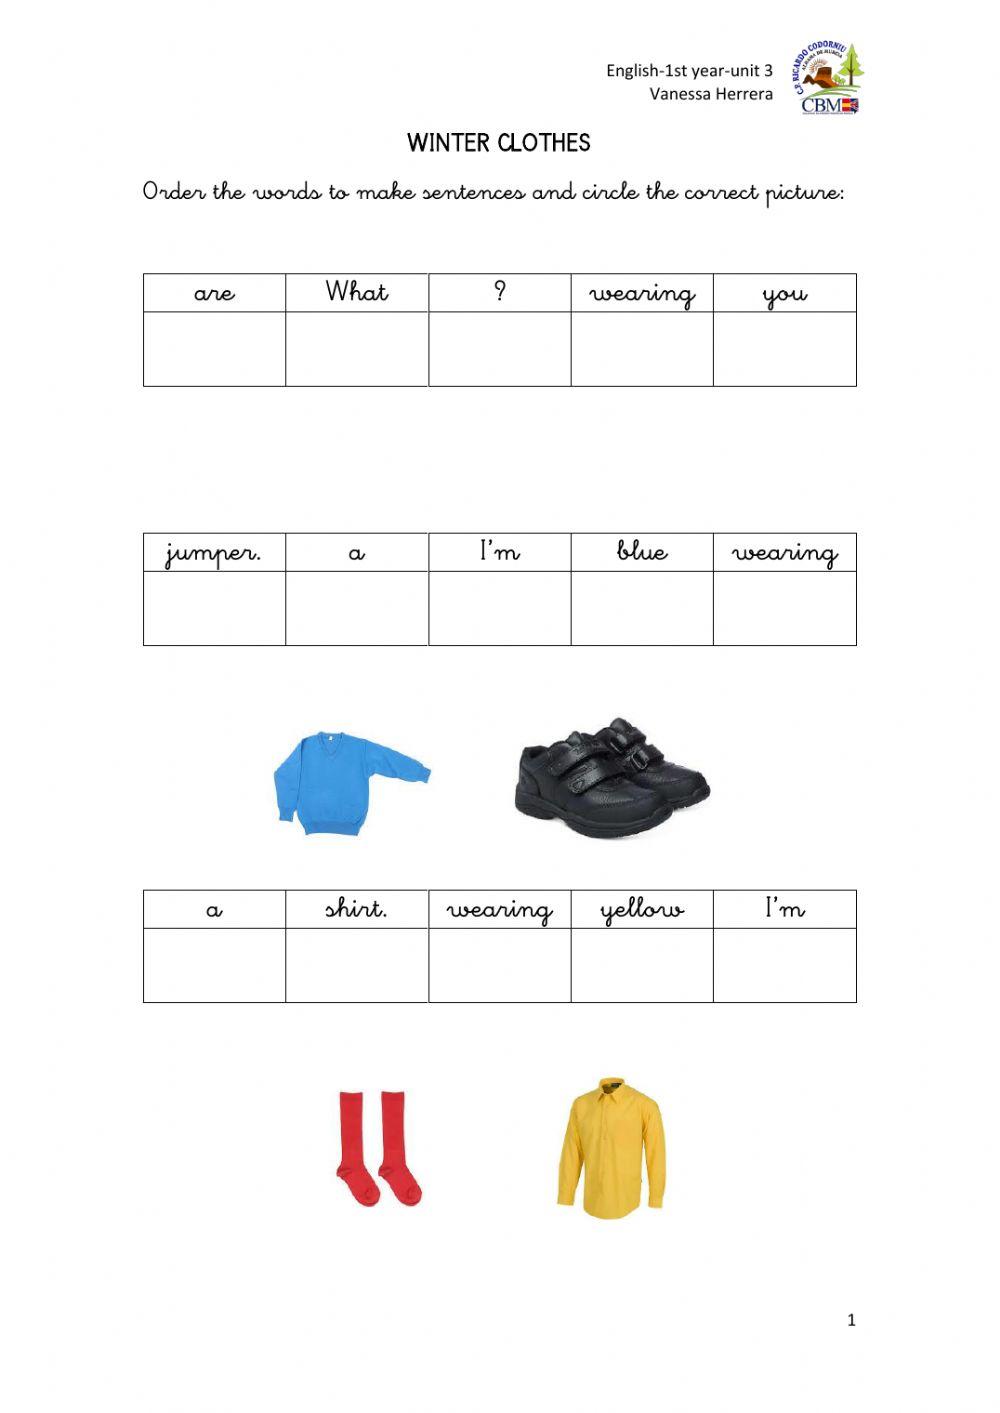 Winter clothes.Read, order and circle the correct picture.